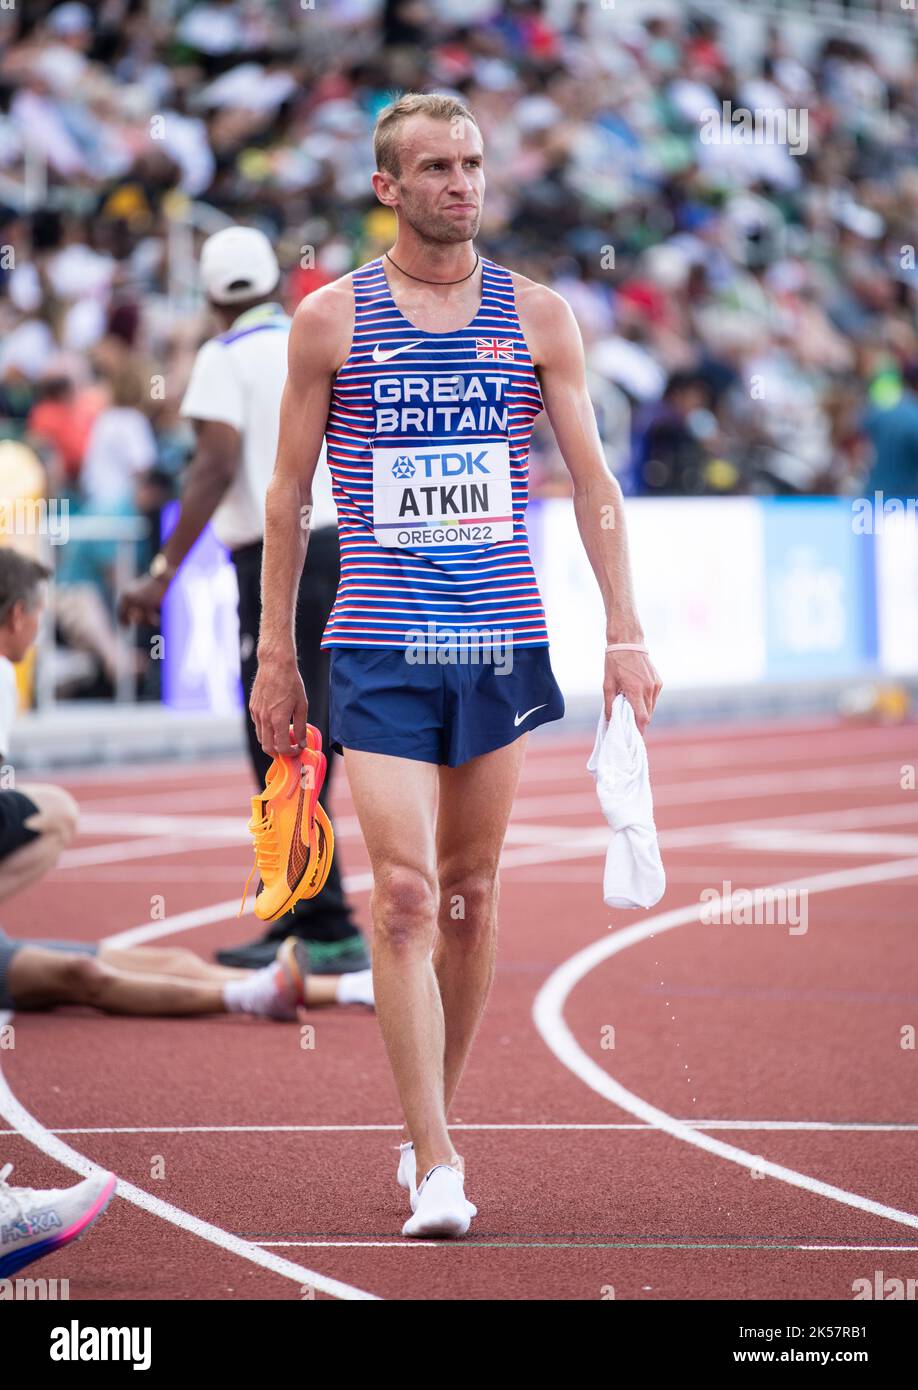 Sam Atkin of GB&NI competing in the men’s 5000m heats at the World Athletics Championships, Hayward Field, Eugene, Oregon USA on the 21st July 2022. P Stock Photo